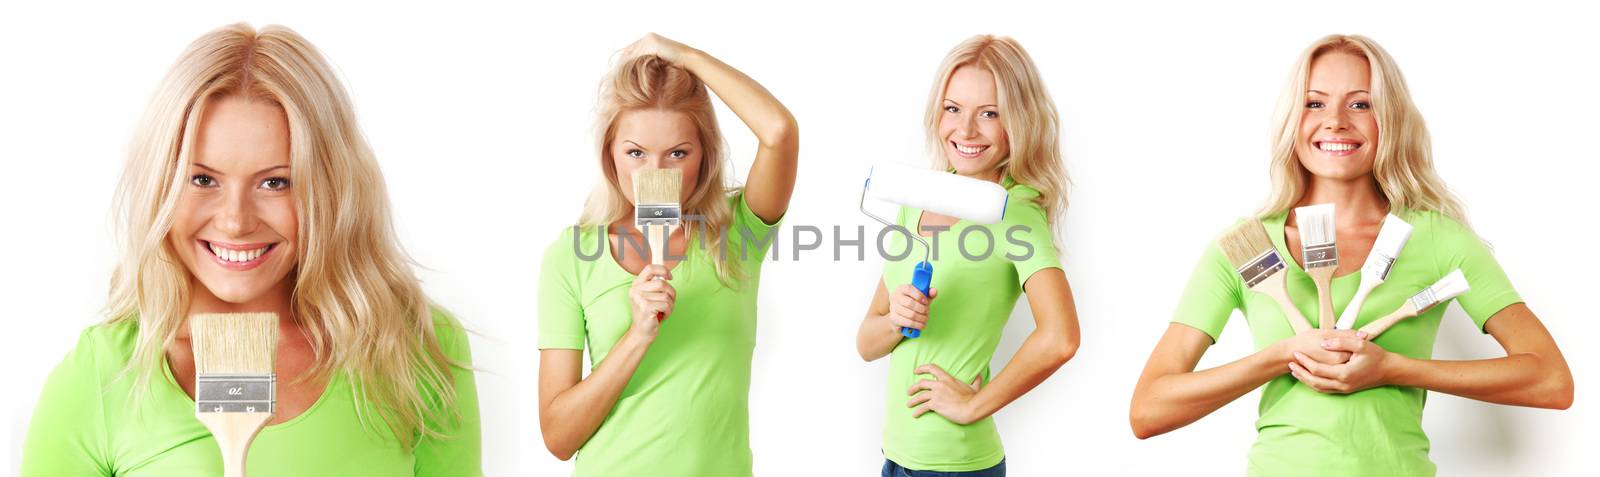 Funny young woman with new clean paint brush and paint roller isolated on white background, set of pictures, renovation design tools concept